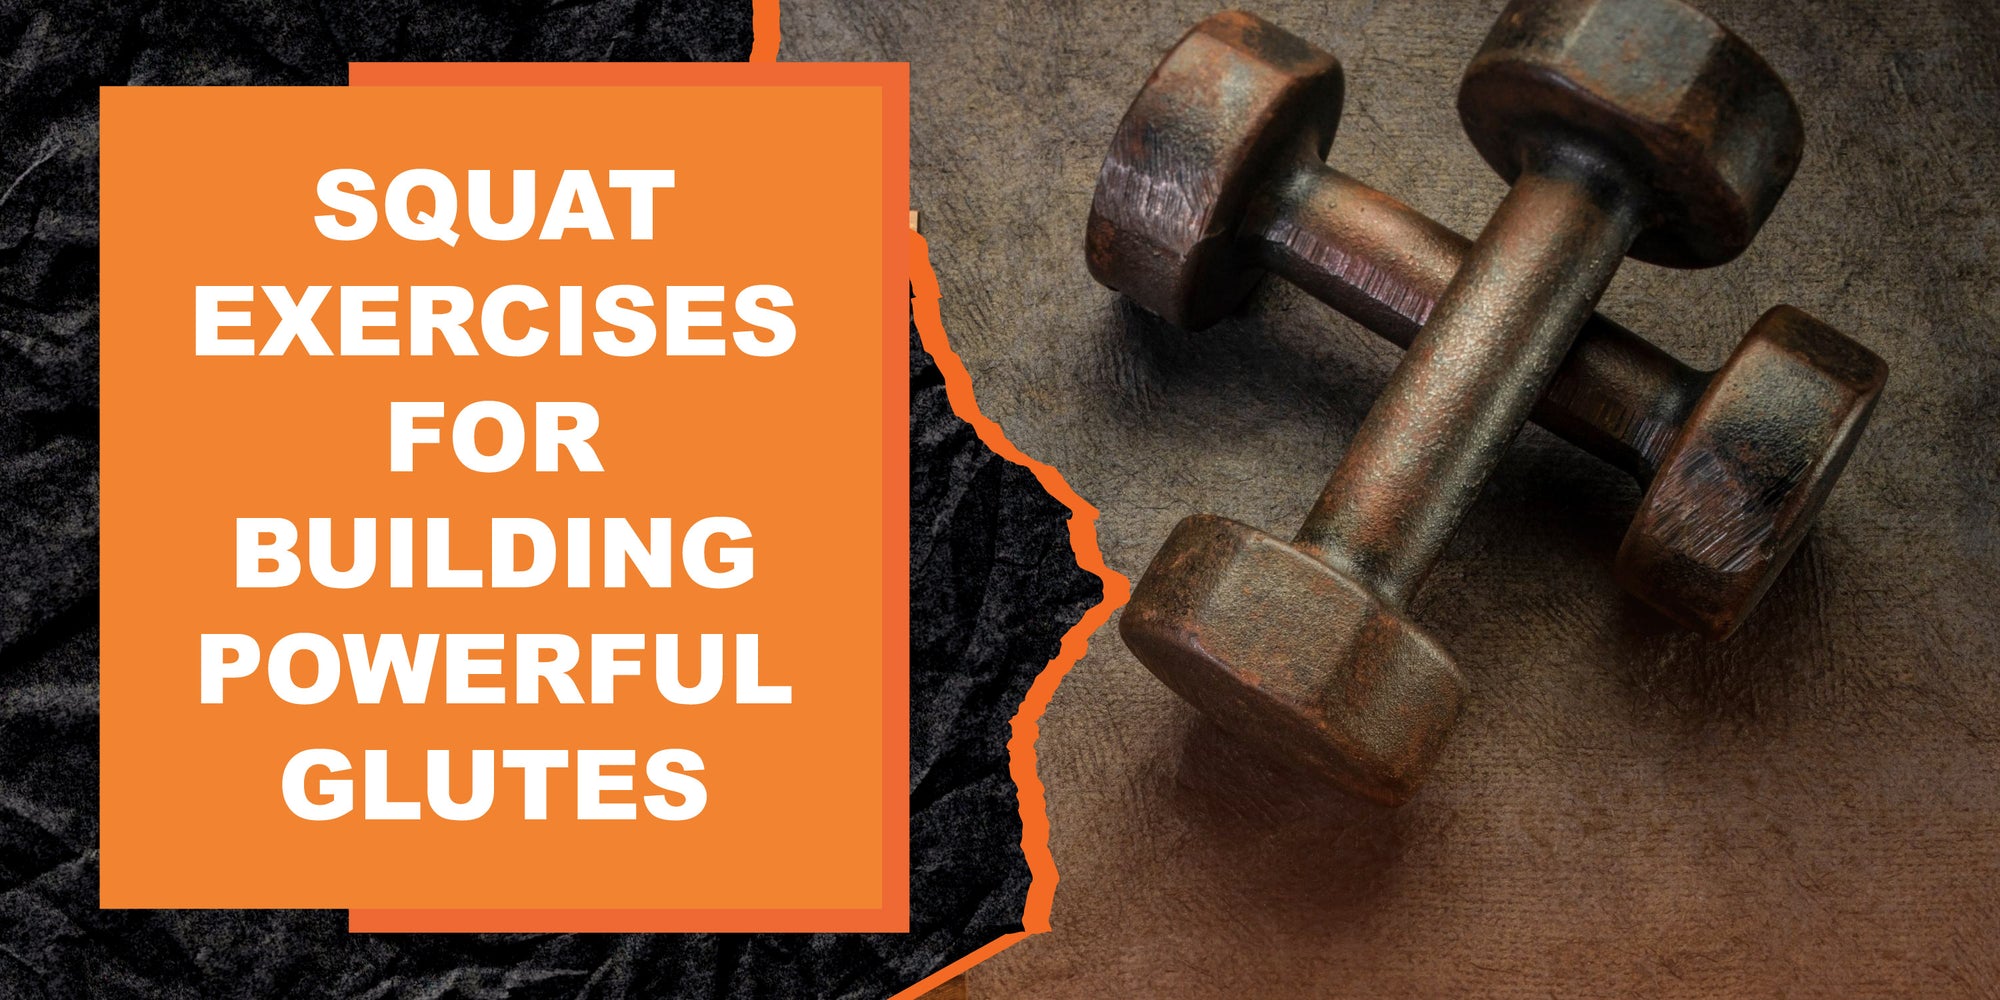 Squat Exercises For Building Powerful Glutes